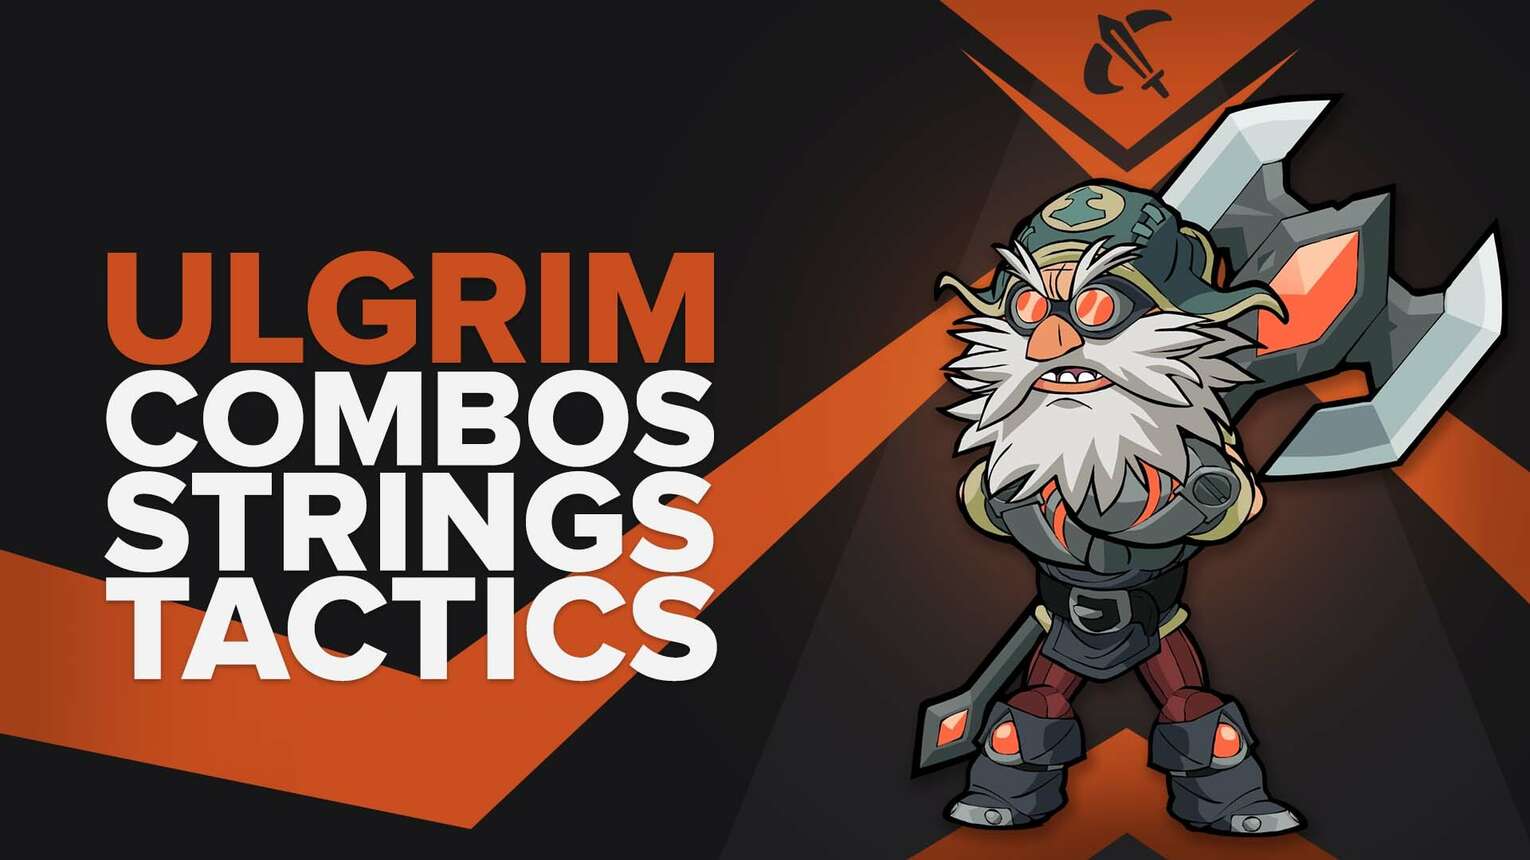 Best Ulgrim combos, strings, and combat tactics in Brawlhalla